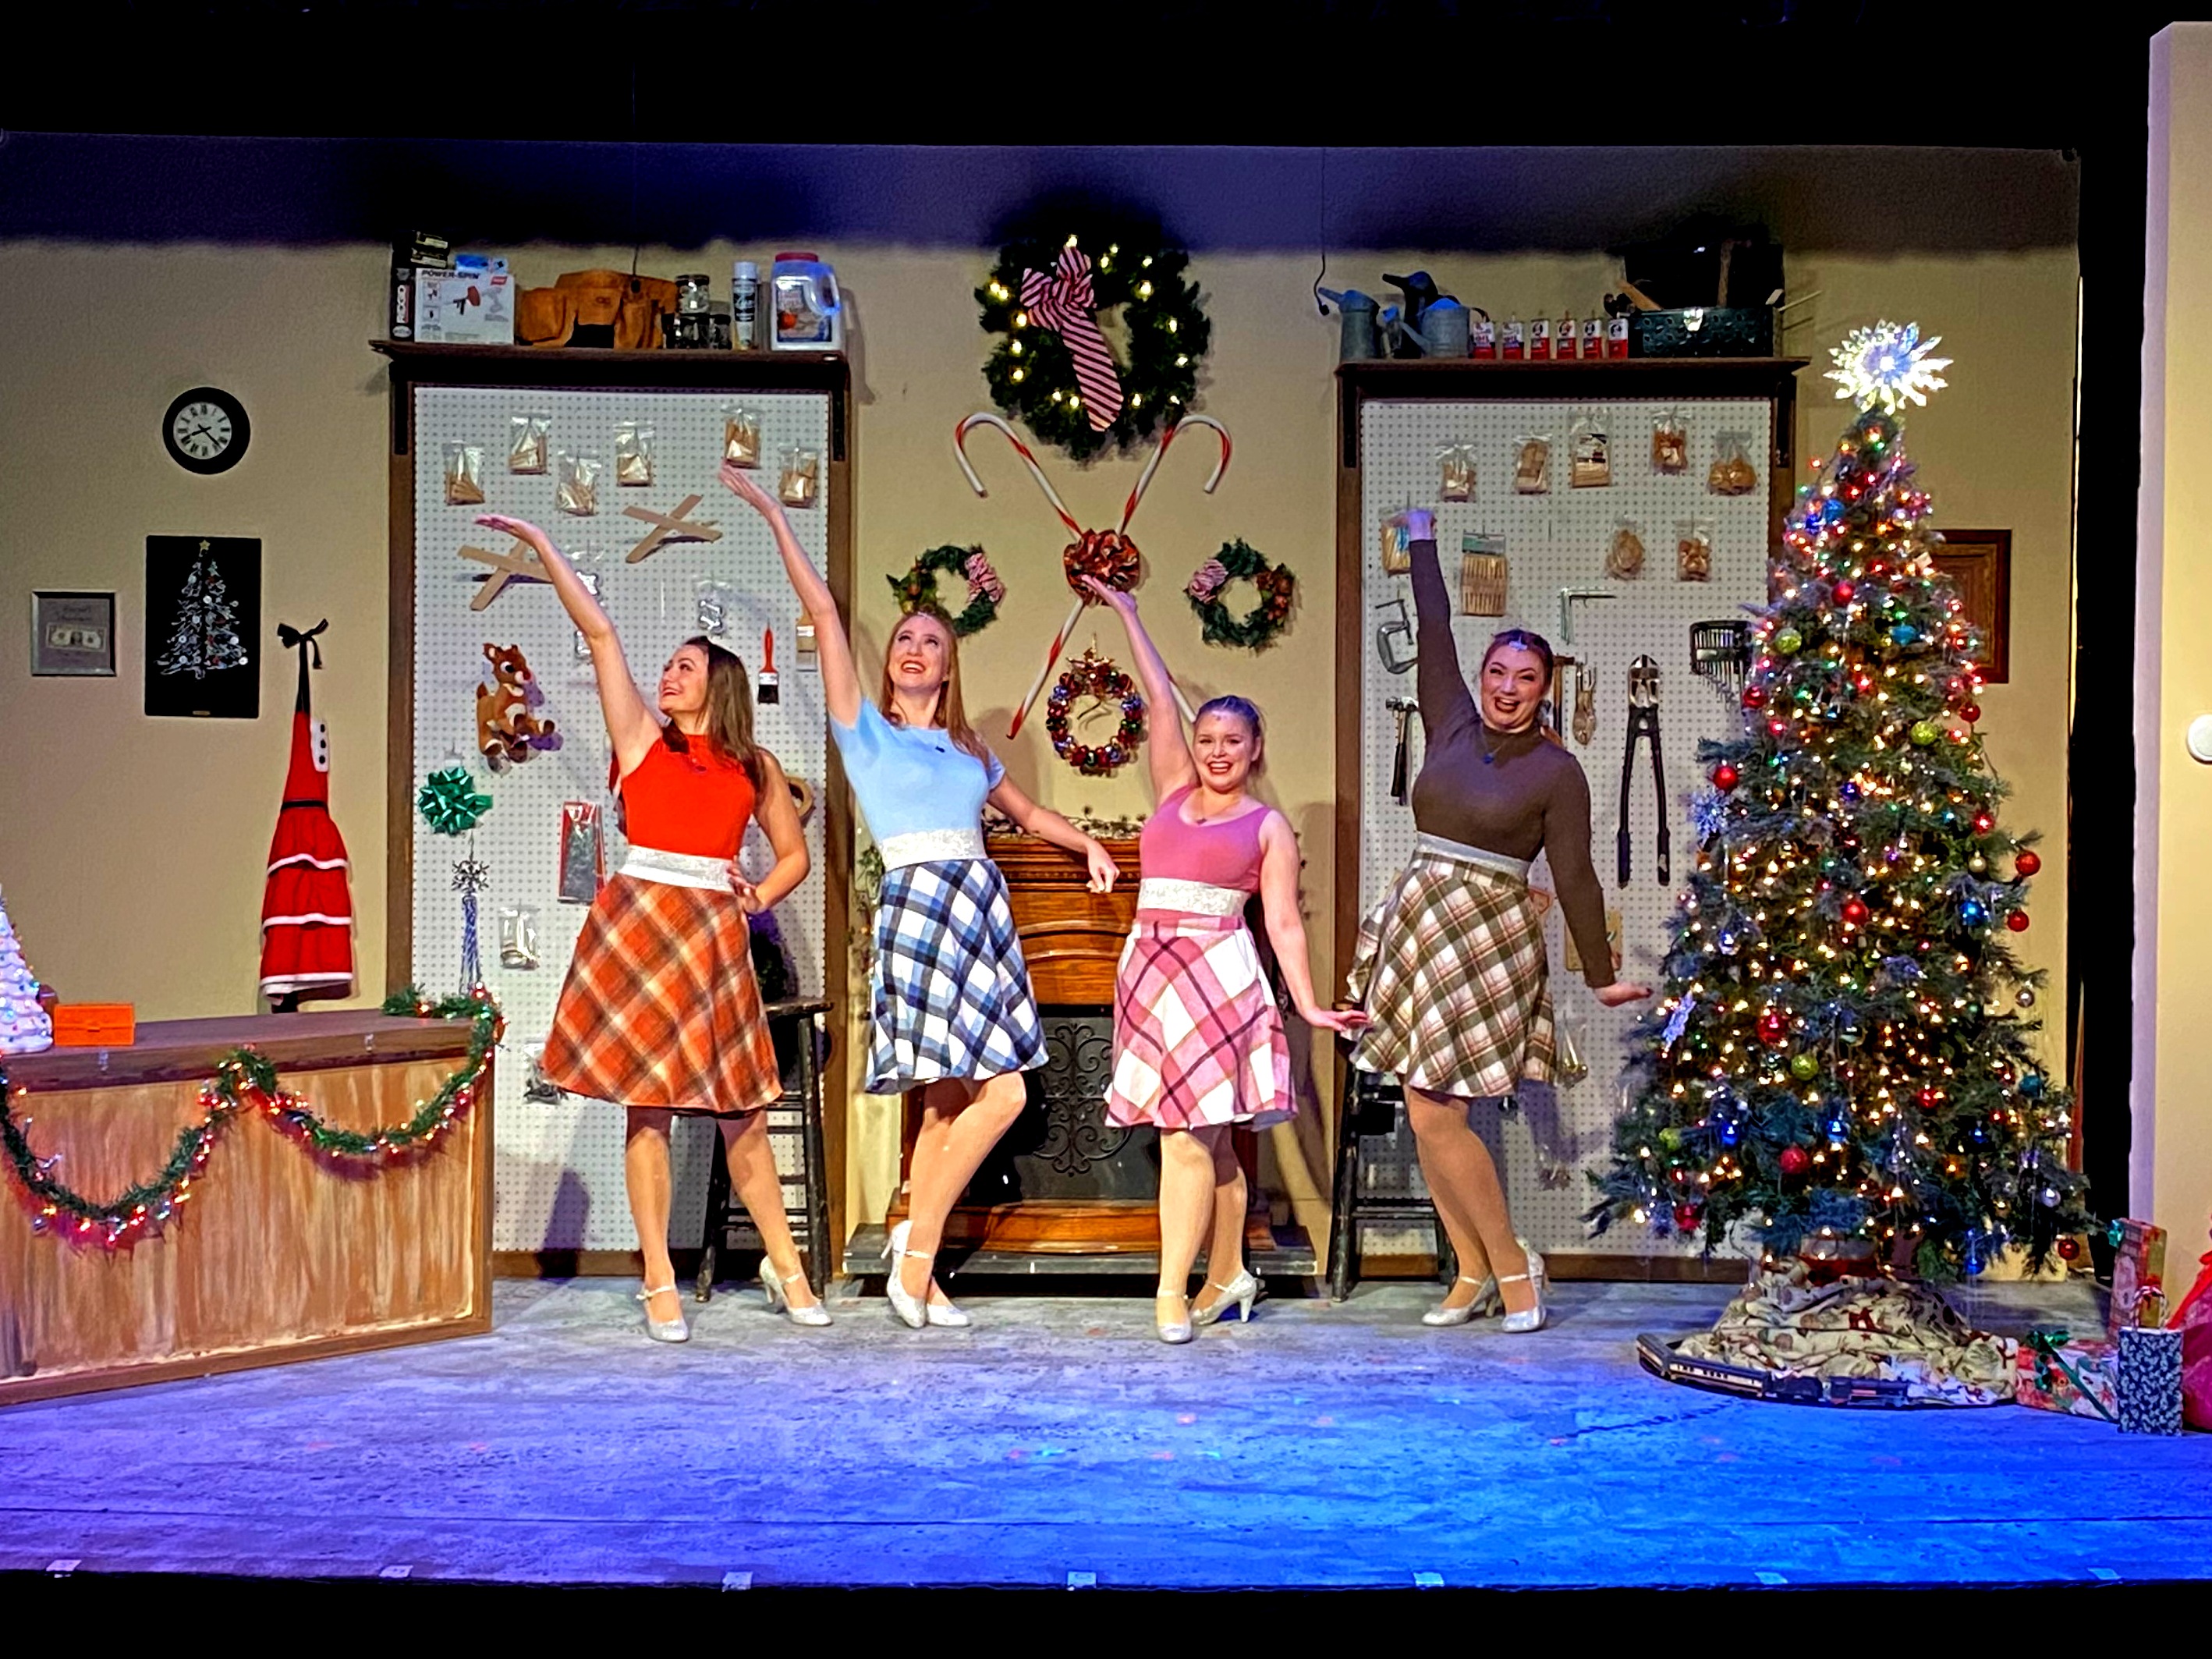 Missy, Suzy, Cindy Lou, and Betty Jean are back! 